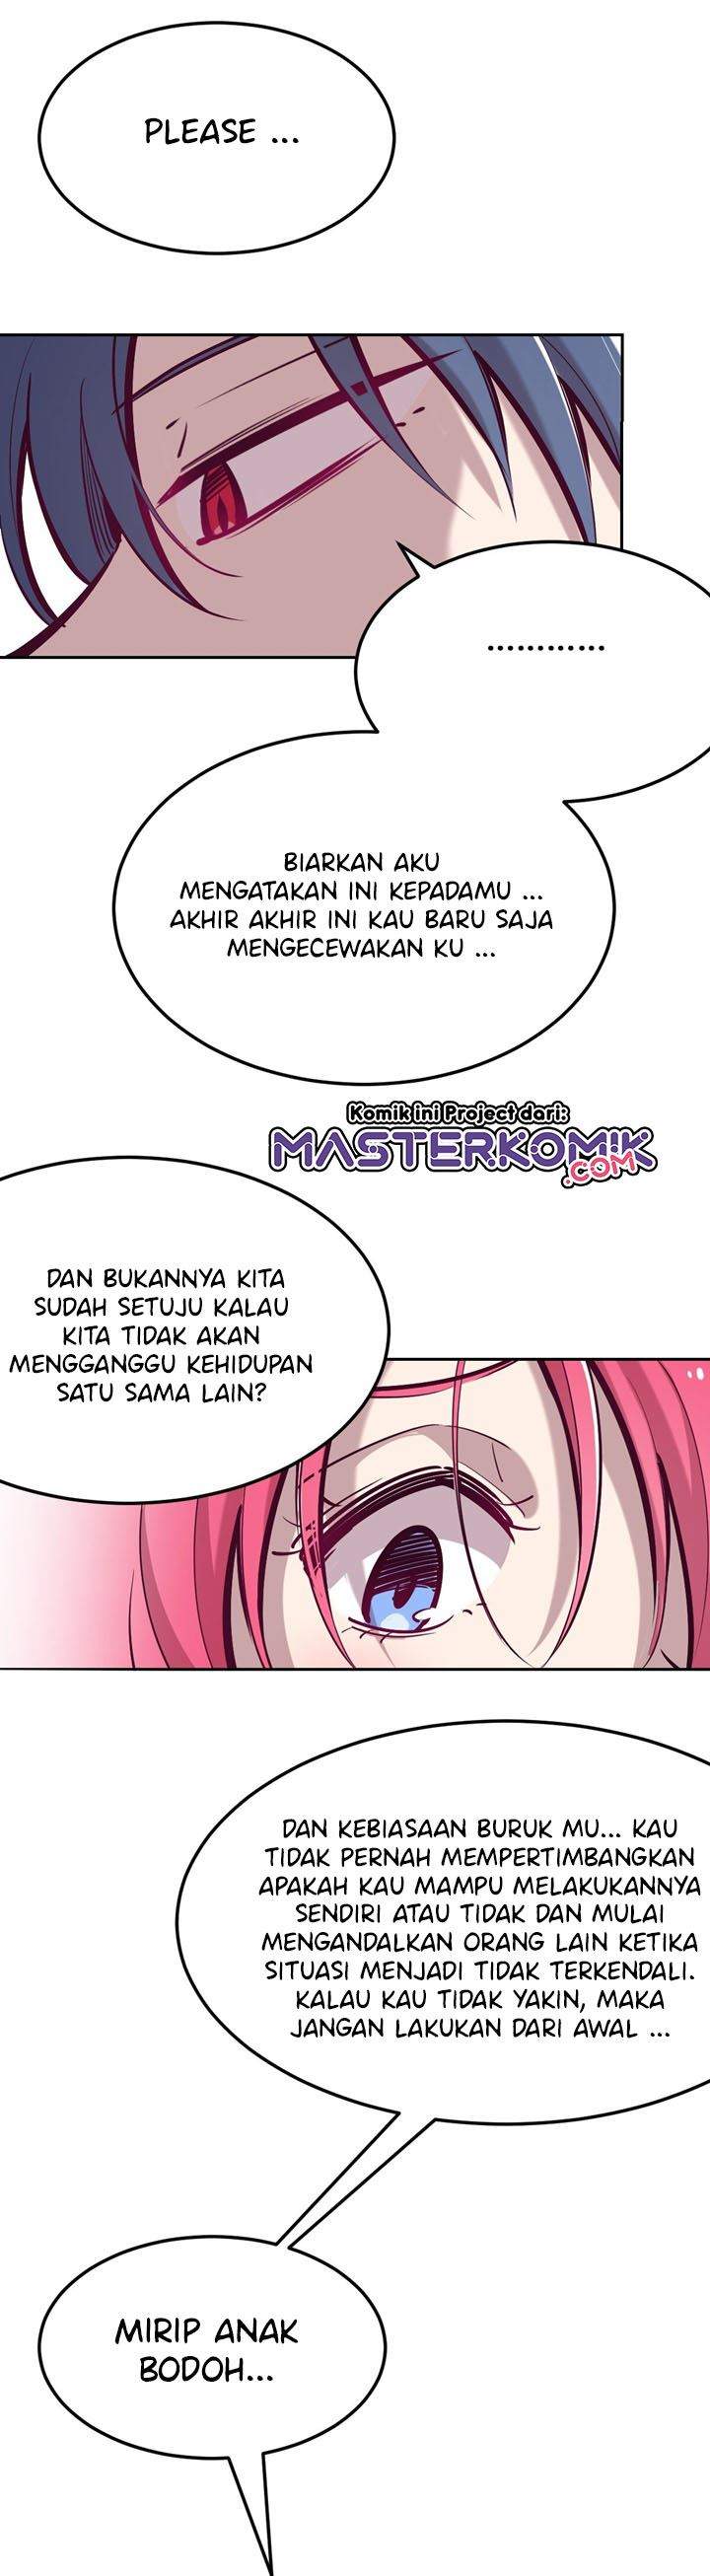 Demon X Angel, Can’t Get Along! Chapter 23